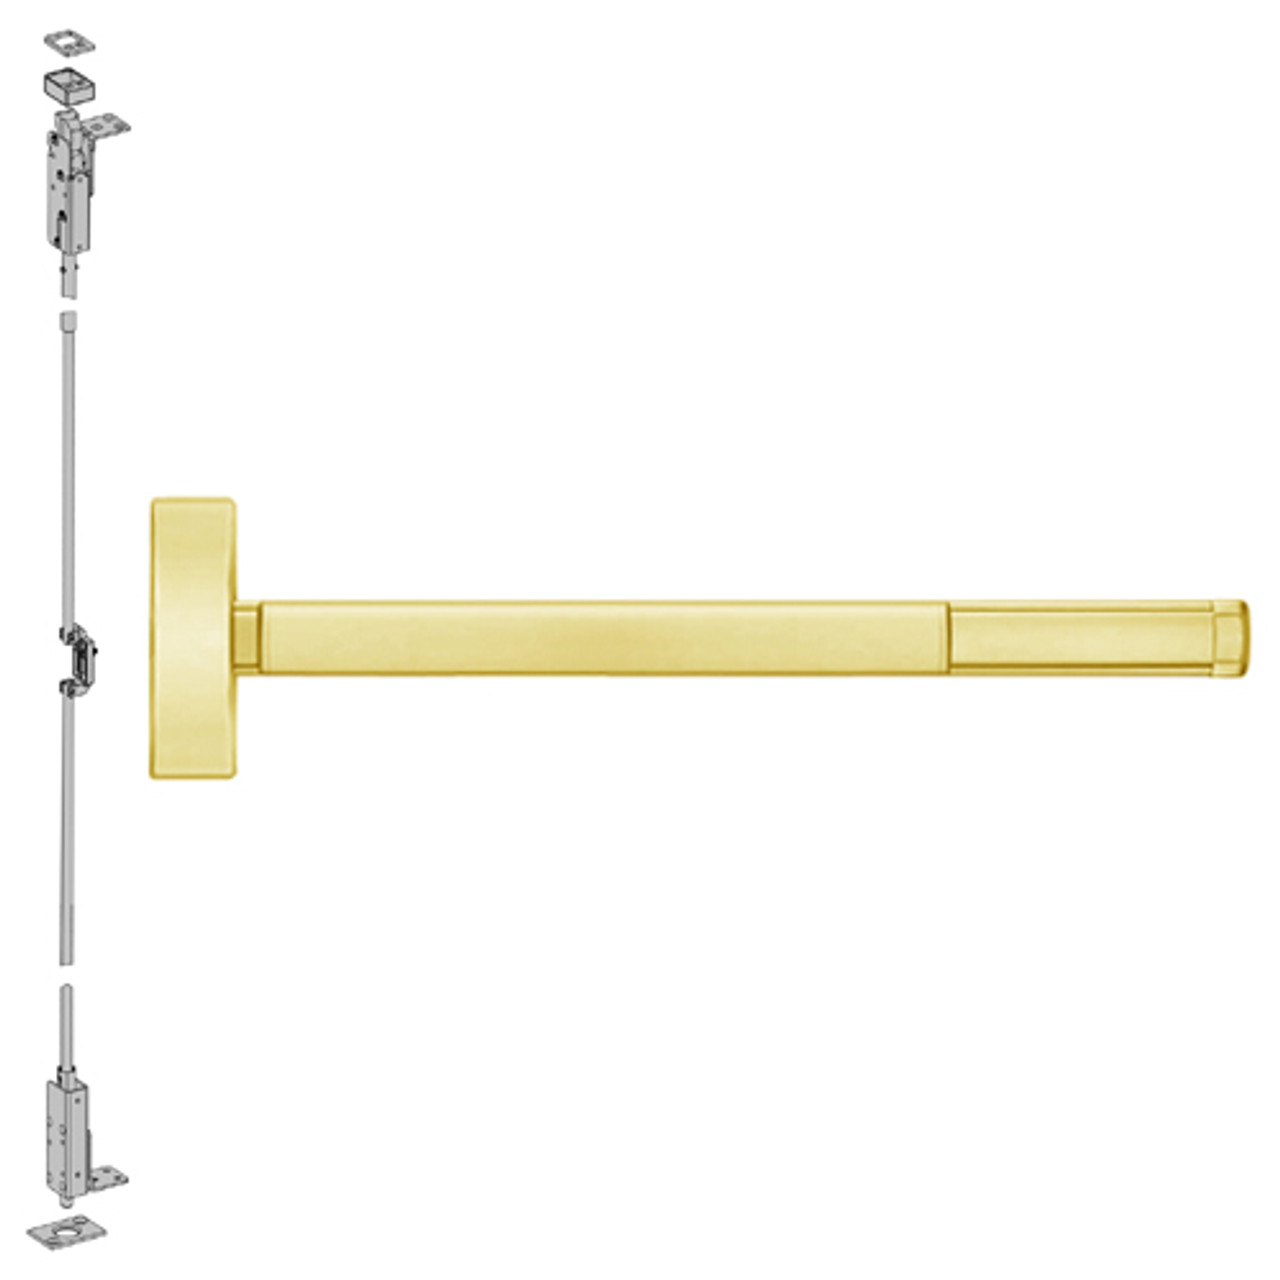 ELRFL2703LBR-605-36 PHI 2700 Series Wood Door Concealed Vertical Exit Device with Electric Latch Retraction Prepped for Key Retracts Latchbolt in Bright Brass Finish